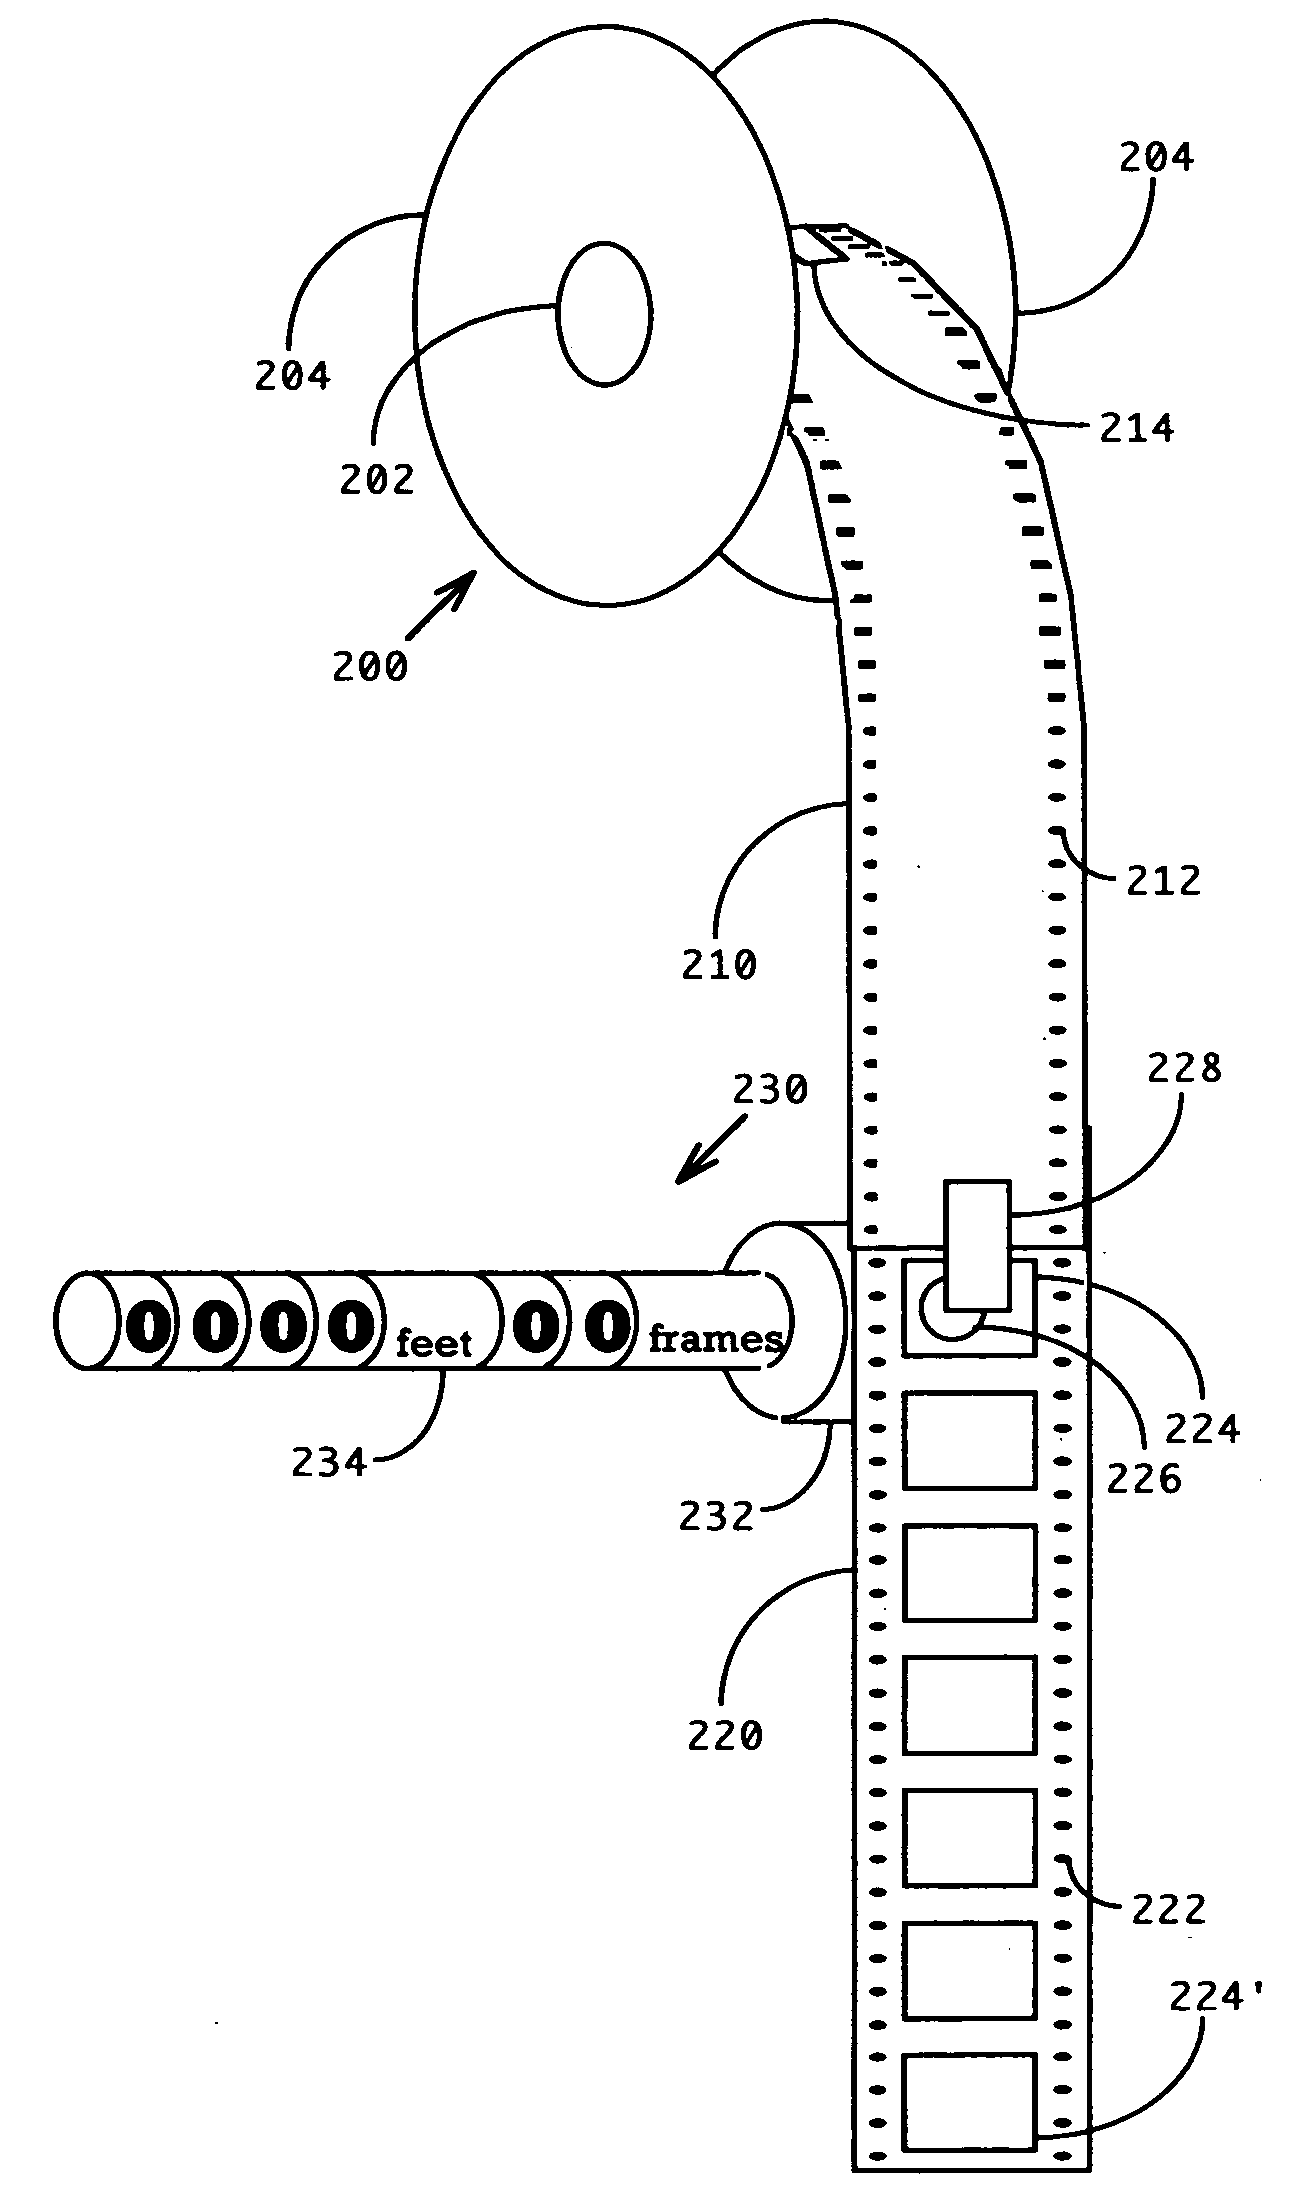 Motion picture asset archive having reduced physical volume and method